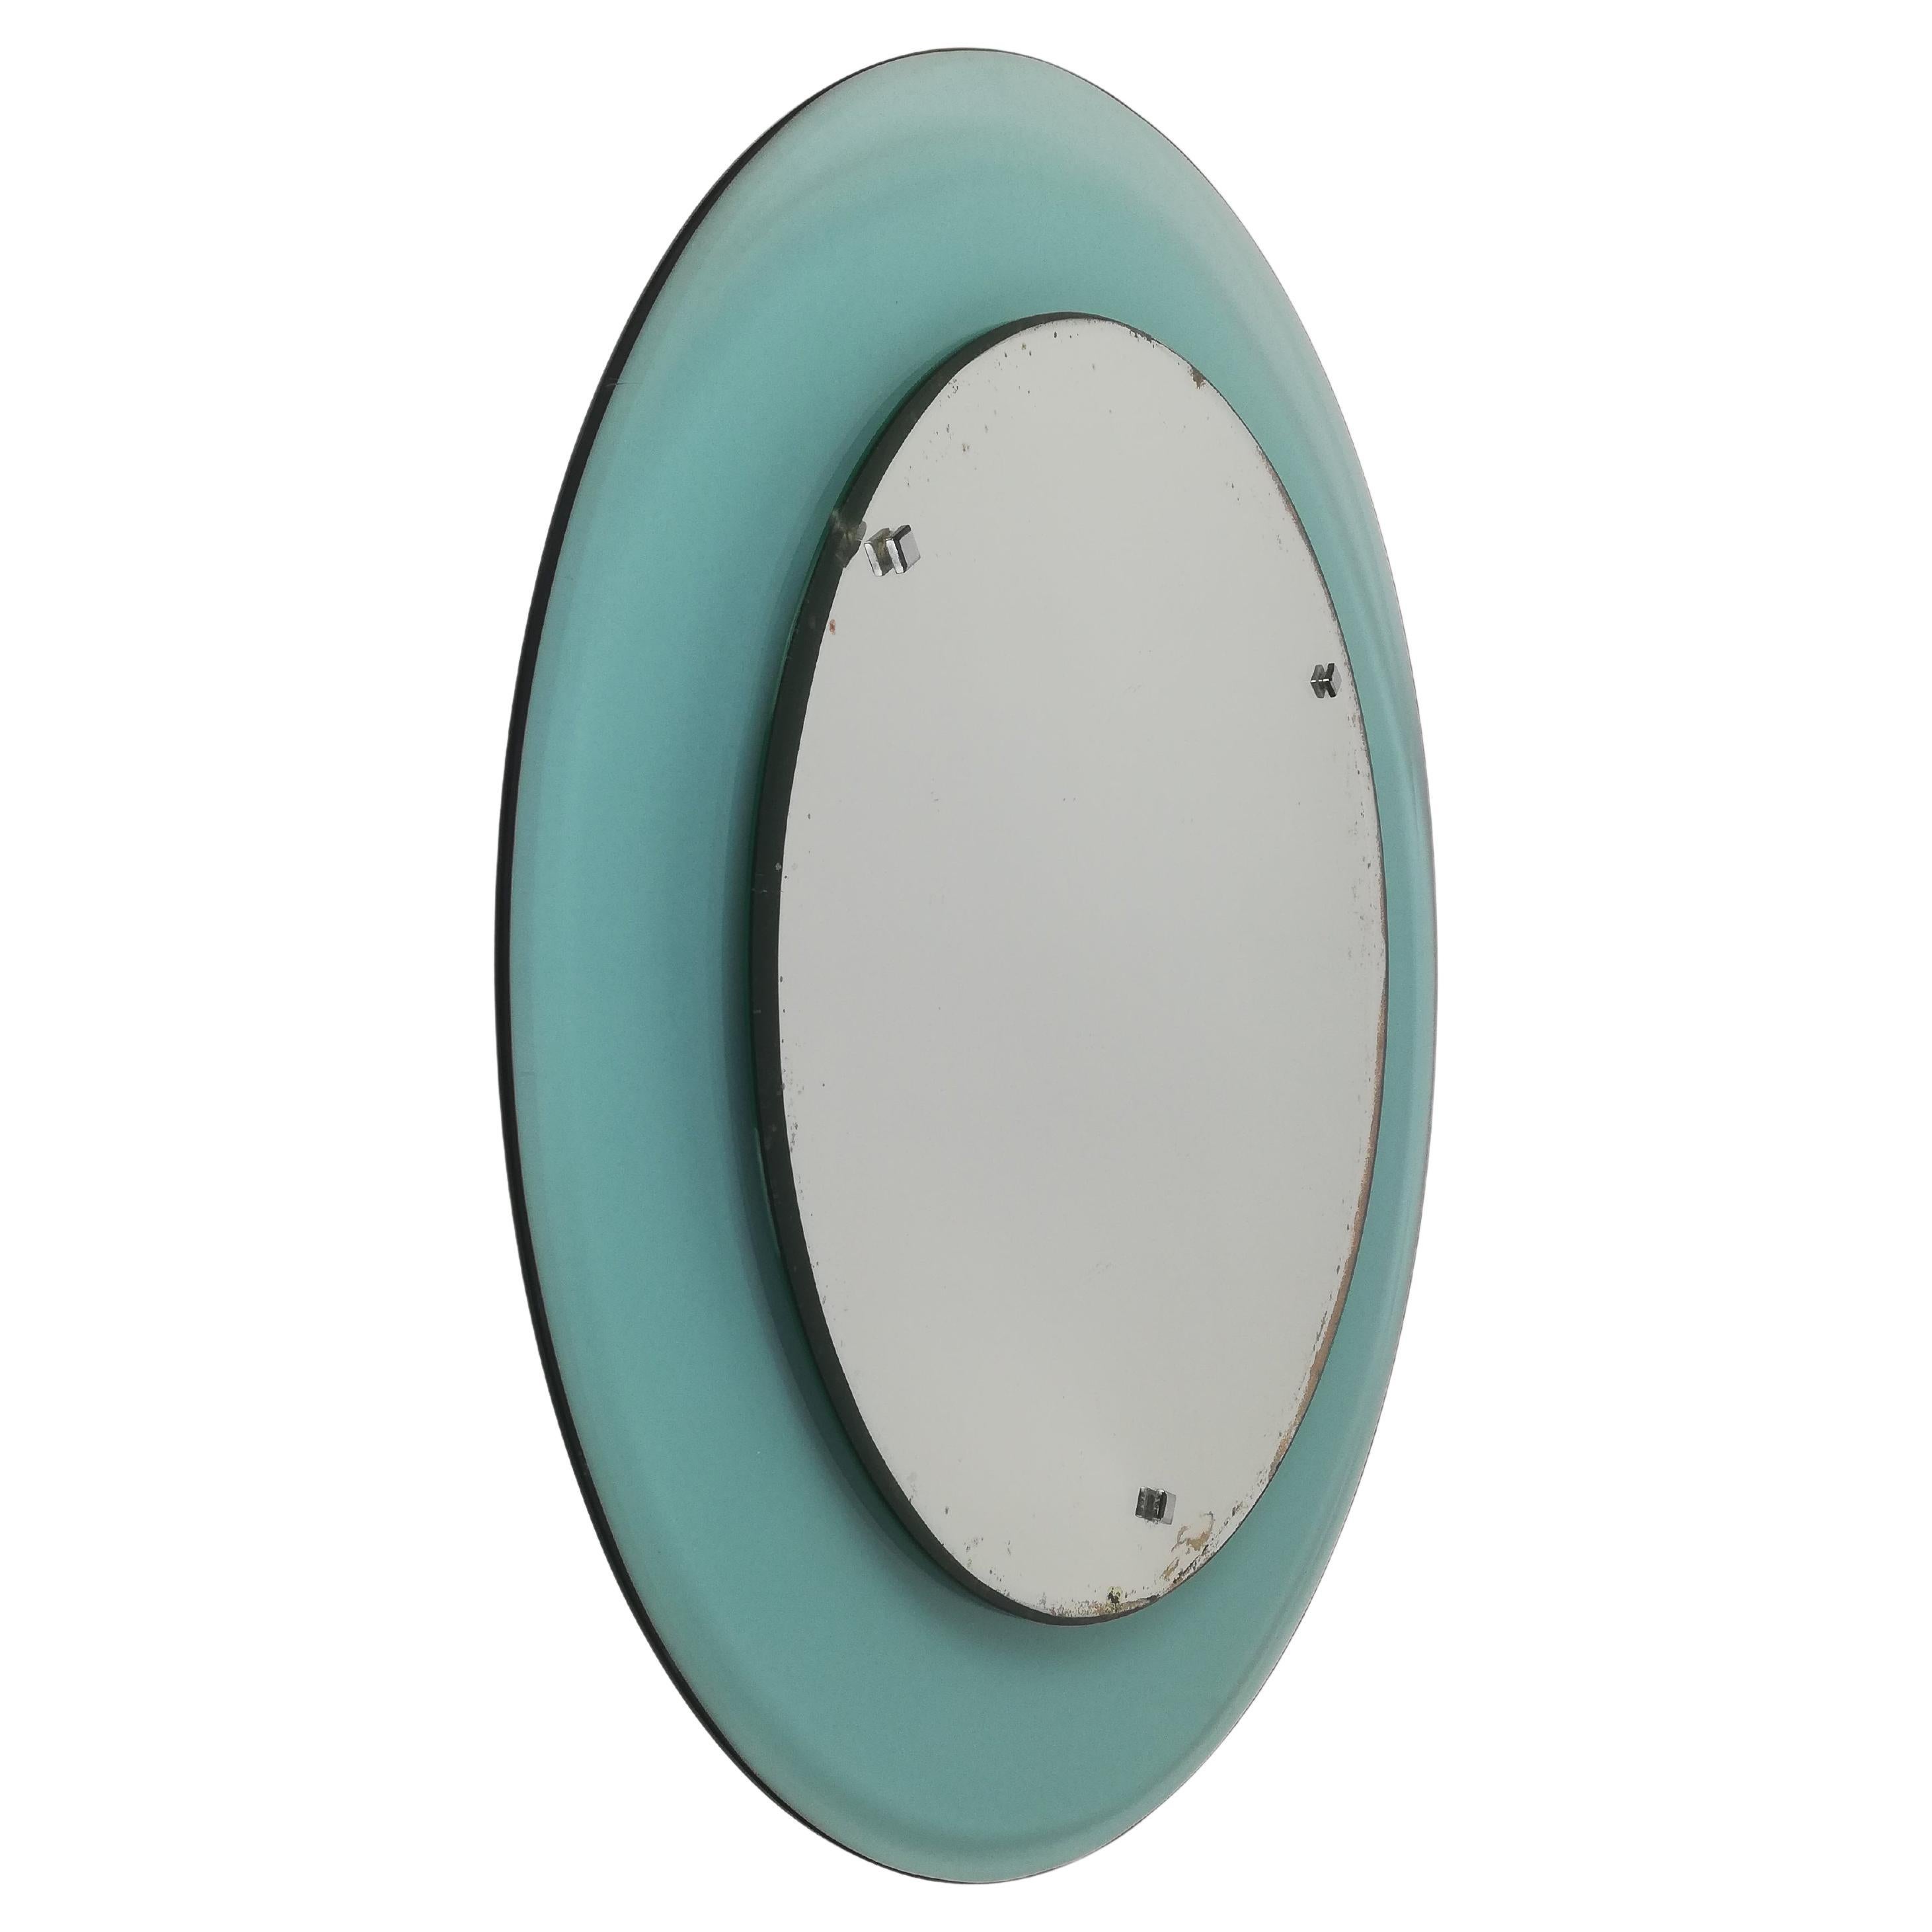 Midcentury Rounded Mirror in Turquois Glass Attributable to Veca, Italy, 1970s For Sale